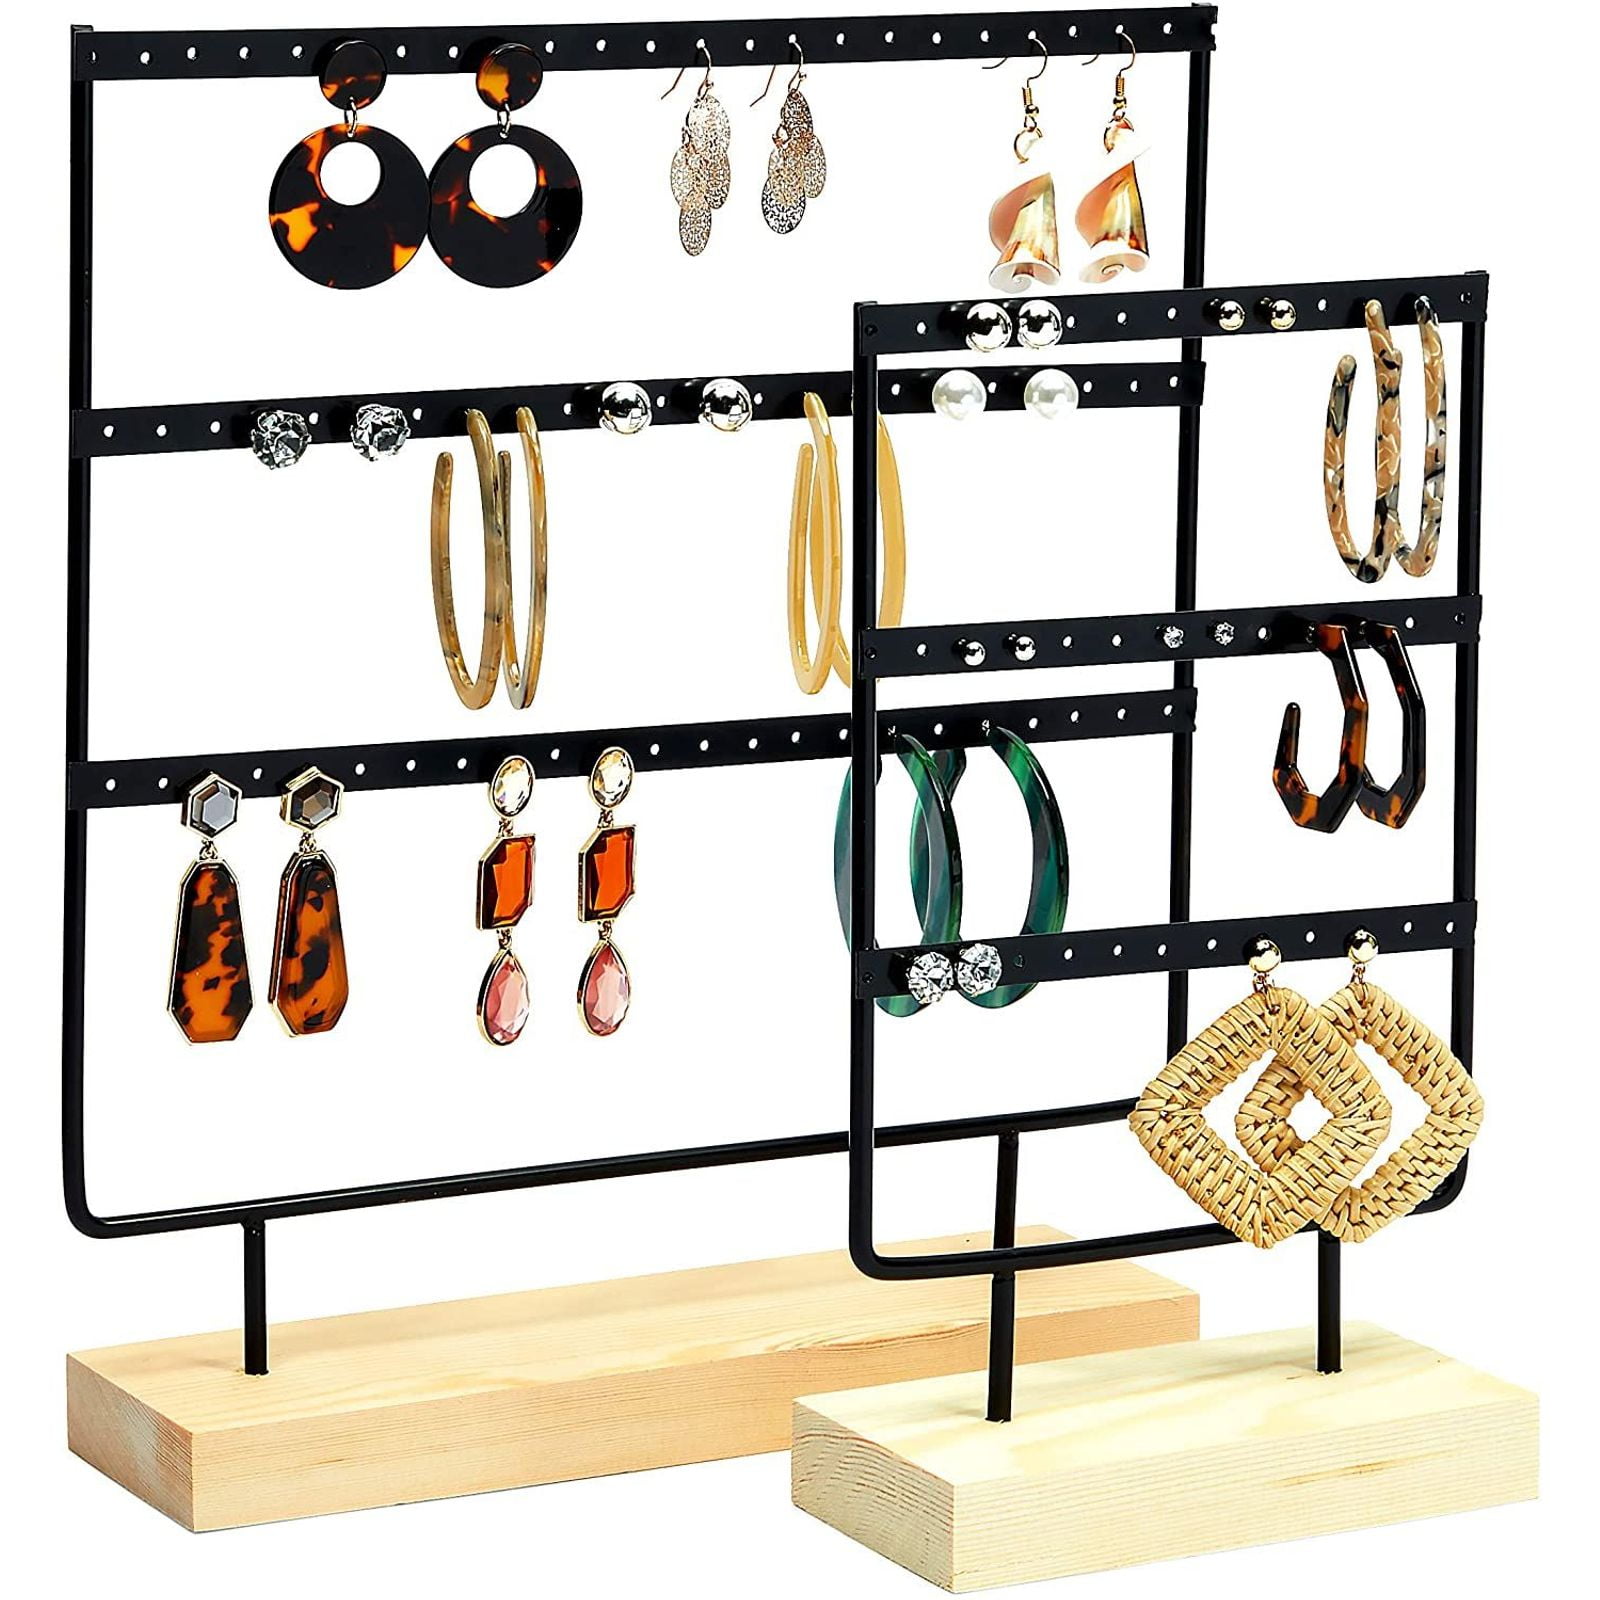 Details about   6Pack T Bar Earring Display Stand Shop Hoop Drop Earring Storage Holder 